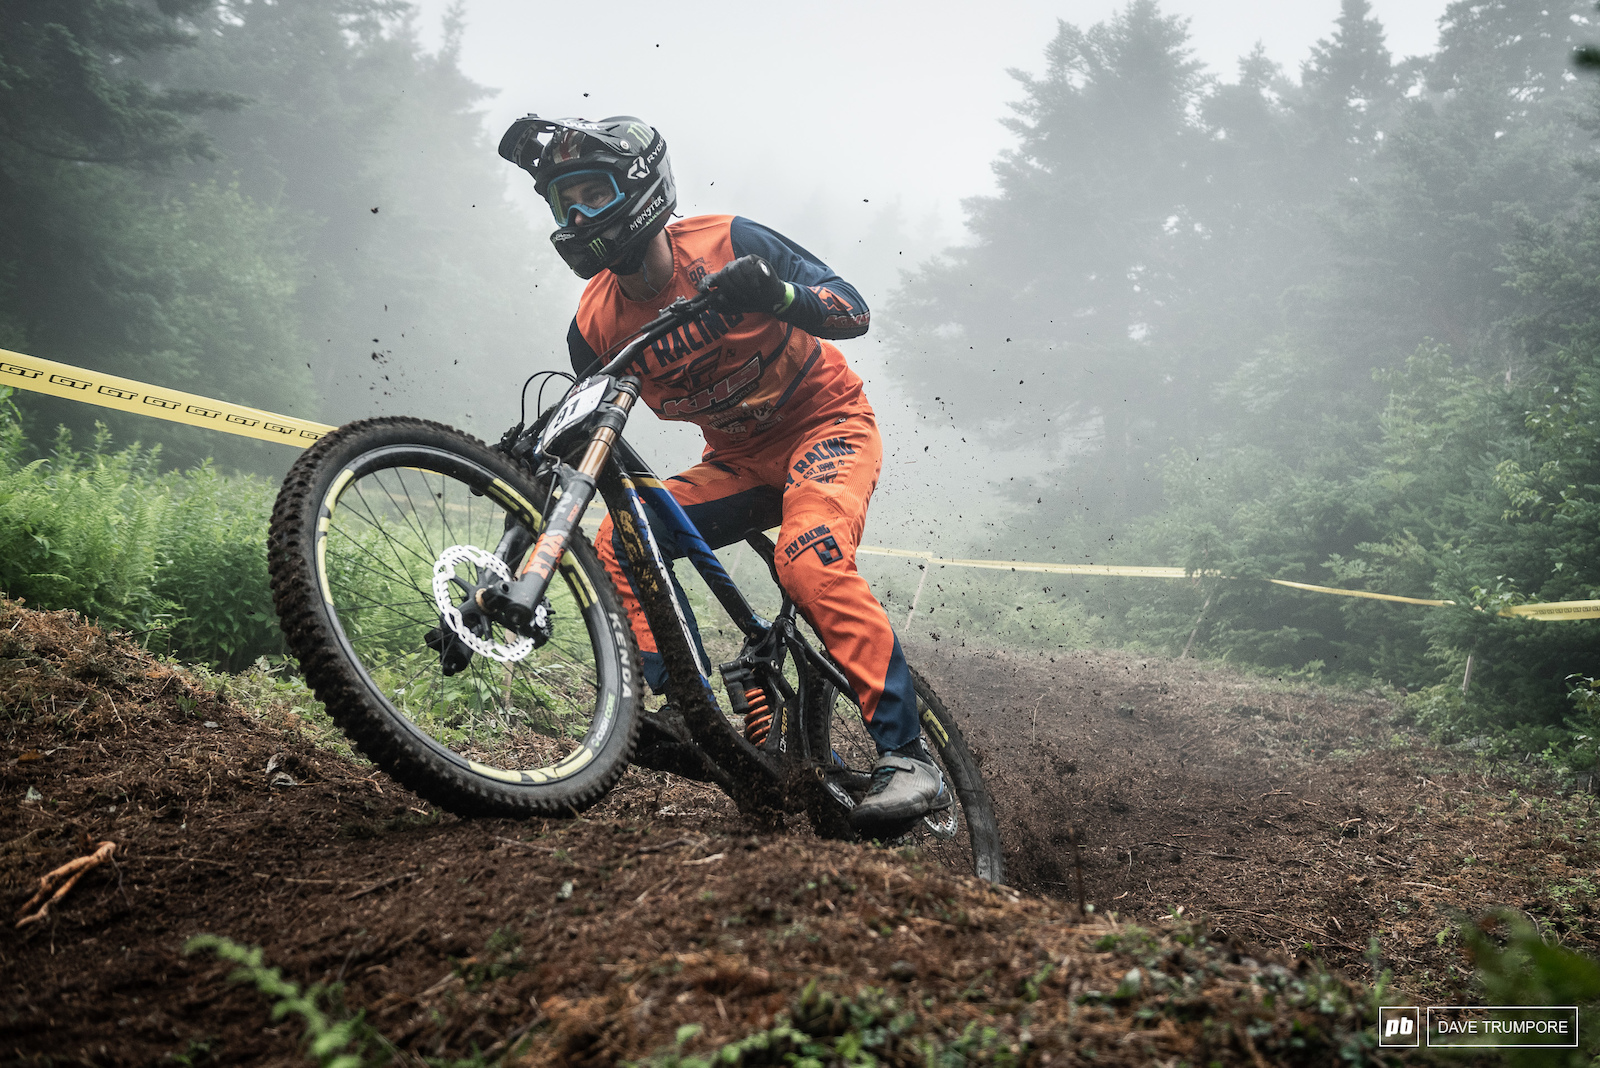 Youngster Nik Nestoroff is looking pretty good in the mud for a SoCal kid.  Perhaps all that time riding in the rain on the World Cup circuit will pay off here in Vermont.